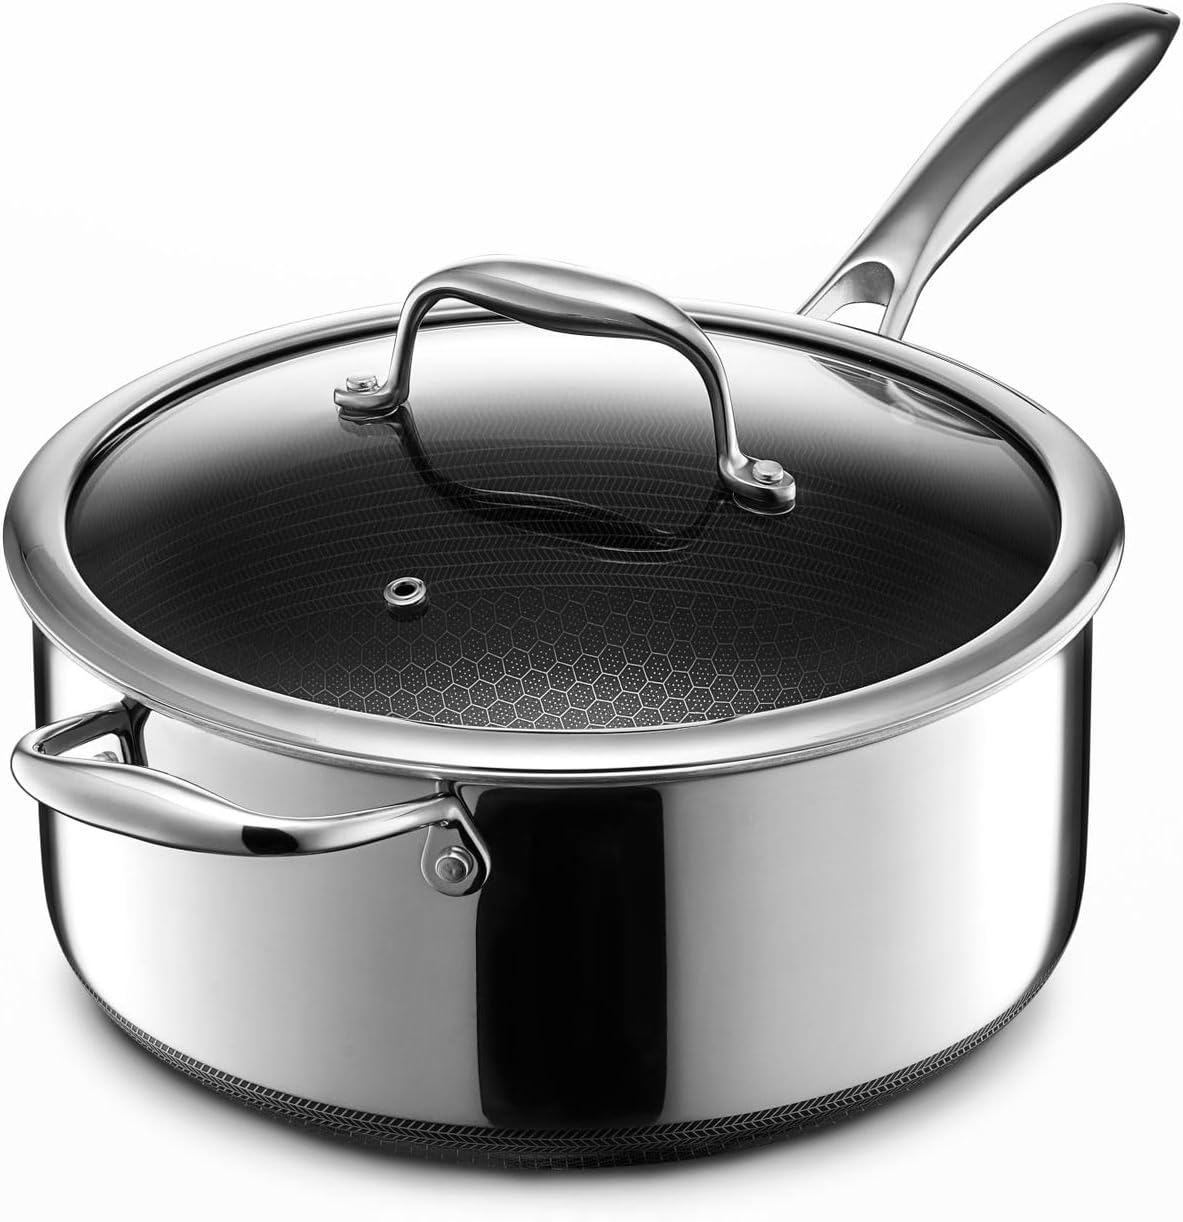 https://bigbigmart.com/wp-content/uploads/2023/12/HexClad-Hybrid-Nonstick-5-Quart-Saucepan-with-Tempered-Glass-Lid-Stay-Cool-Handle-Dishwasher-Safe-Induction-Ready-Compatible-with-All-Cooktops.jpg